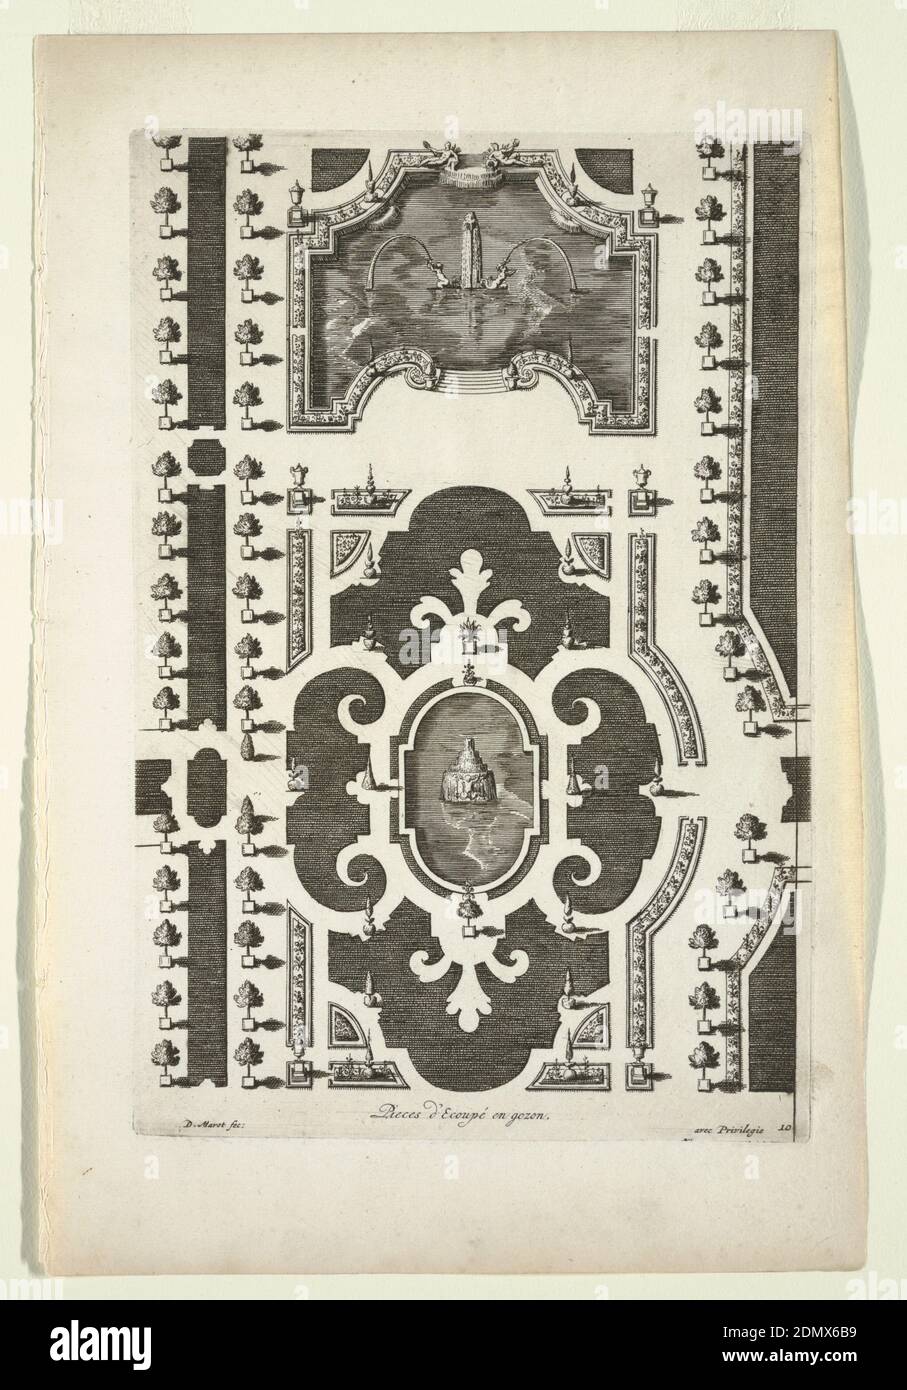 Design for a Garden Parterre of Cut Grass and Colored Gravel, from 'Nouveaux Livre de Parterres,' in Oeuvres Du Sr. D. Marot..., The Hague: Chez Pierre Husson, c.1702, Daniel Marot, French, active in the Netherlands and England, 1661–1752, Daniel Marot, French, active in the Netherlands and England, 1661–1752, Etching on cream laid paper, Symmetrical arrangement of parterres de broderie in desgin of fleur-de-lis and cartouches. The spaces between filled witih colored sand or gravel. At upper center, a reflective pool with fountain flanked by putti spewing water. Borders of vertical grass Stock Photo